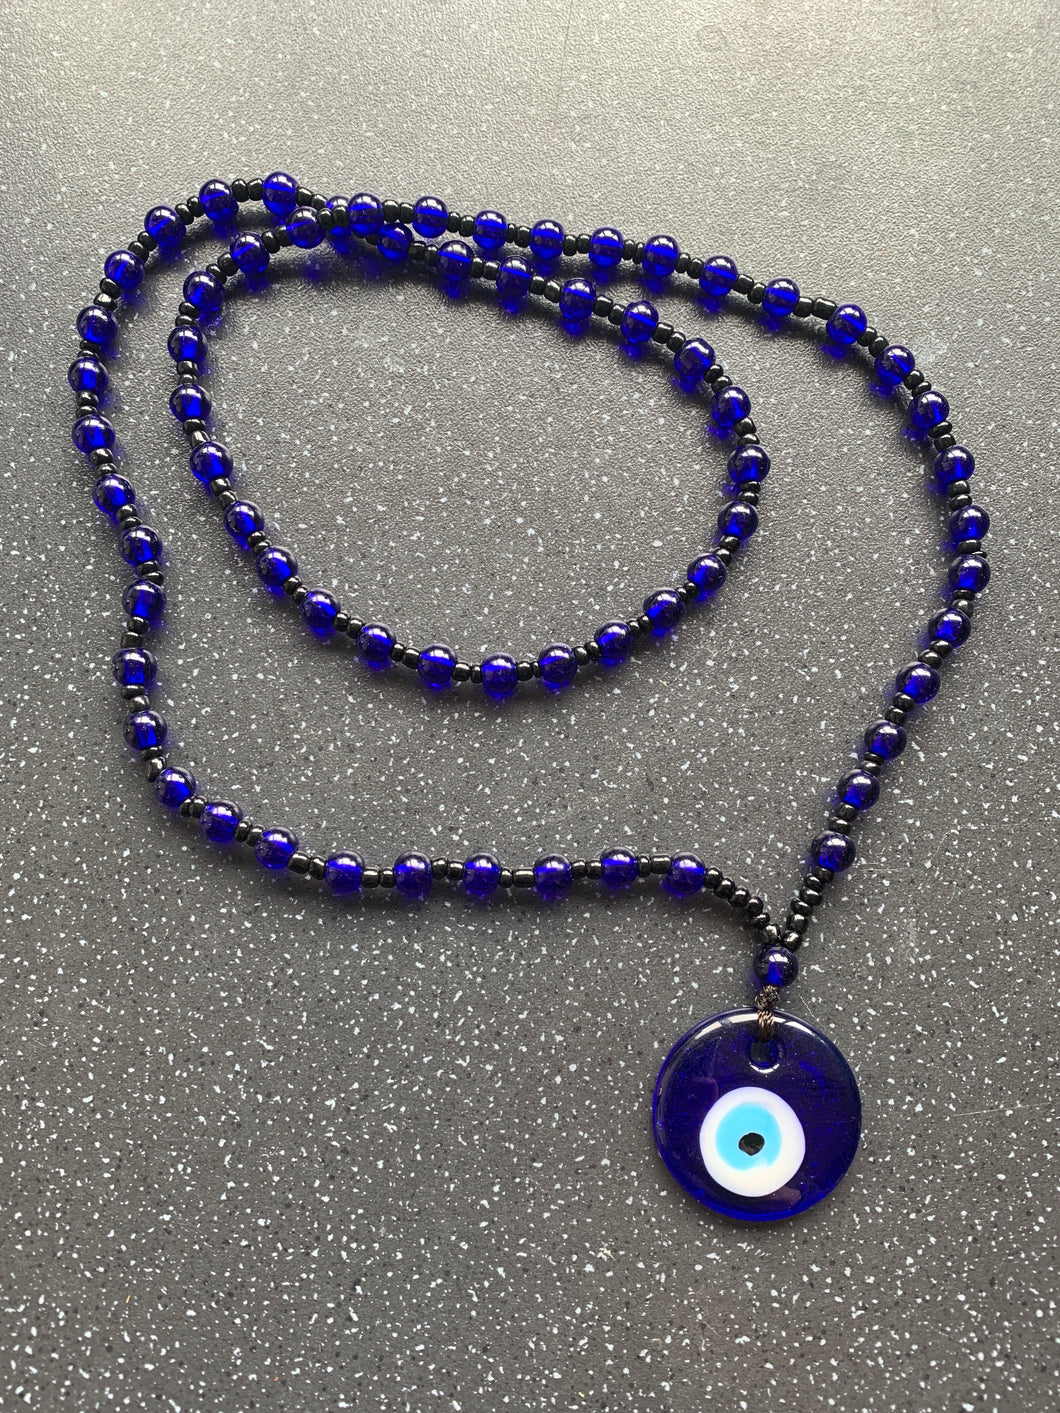 *VERY POWERFUL* Protection Evil Eye Necklace Blue for Removing Obstacles, Problems & Blockages In life